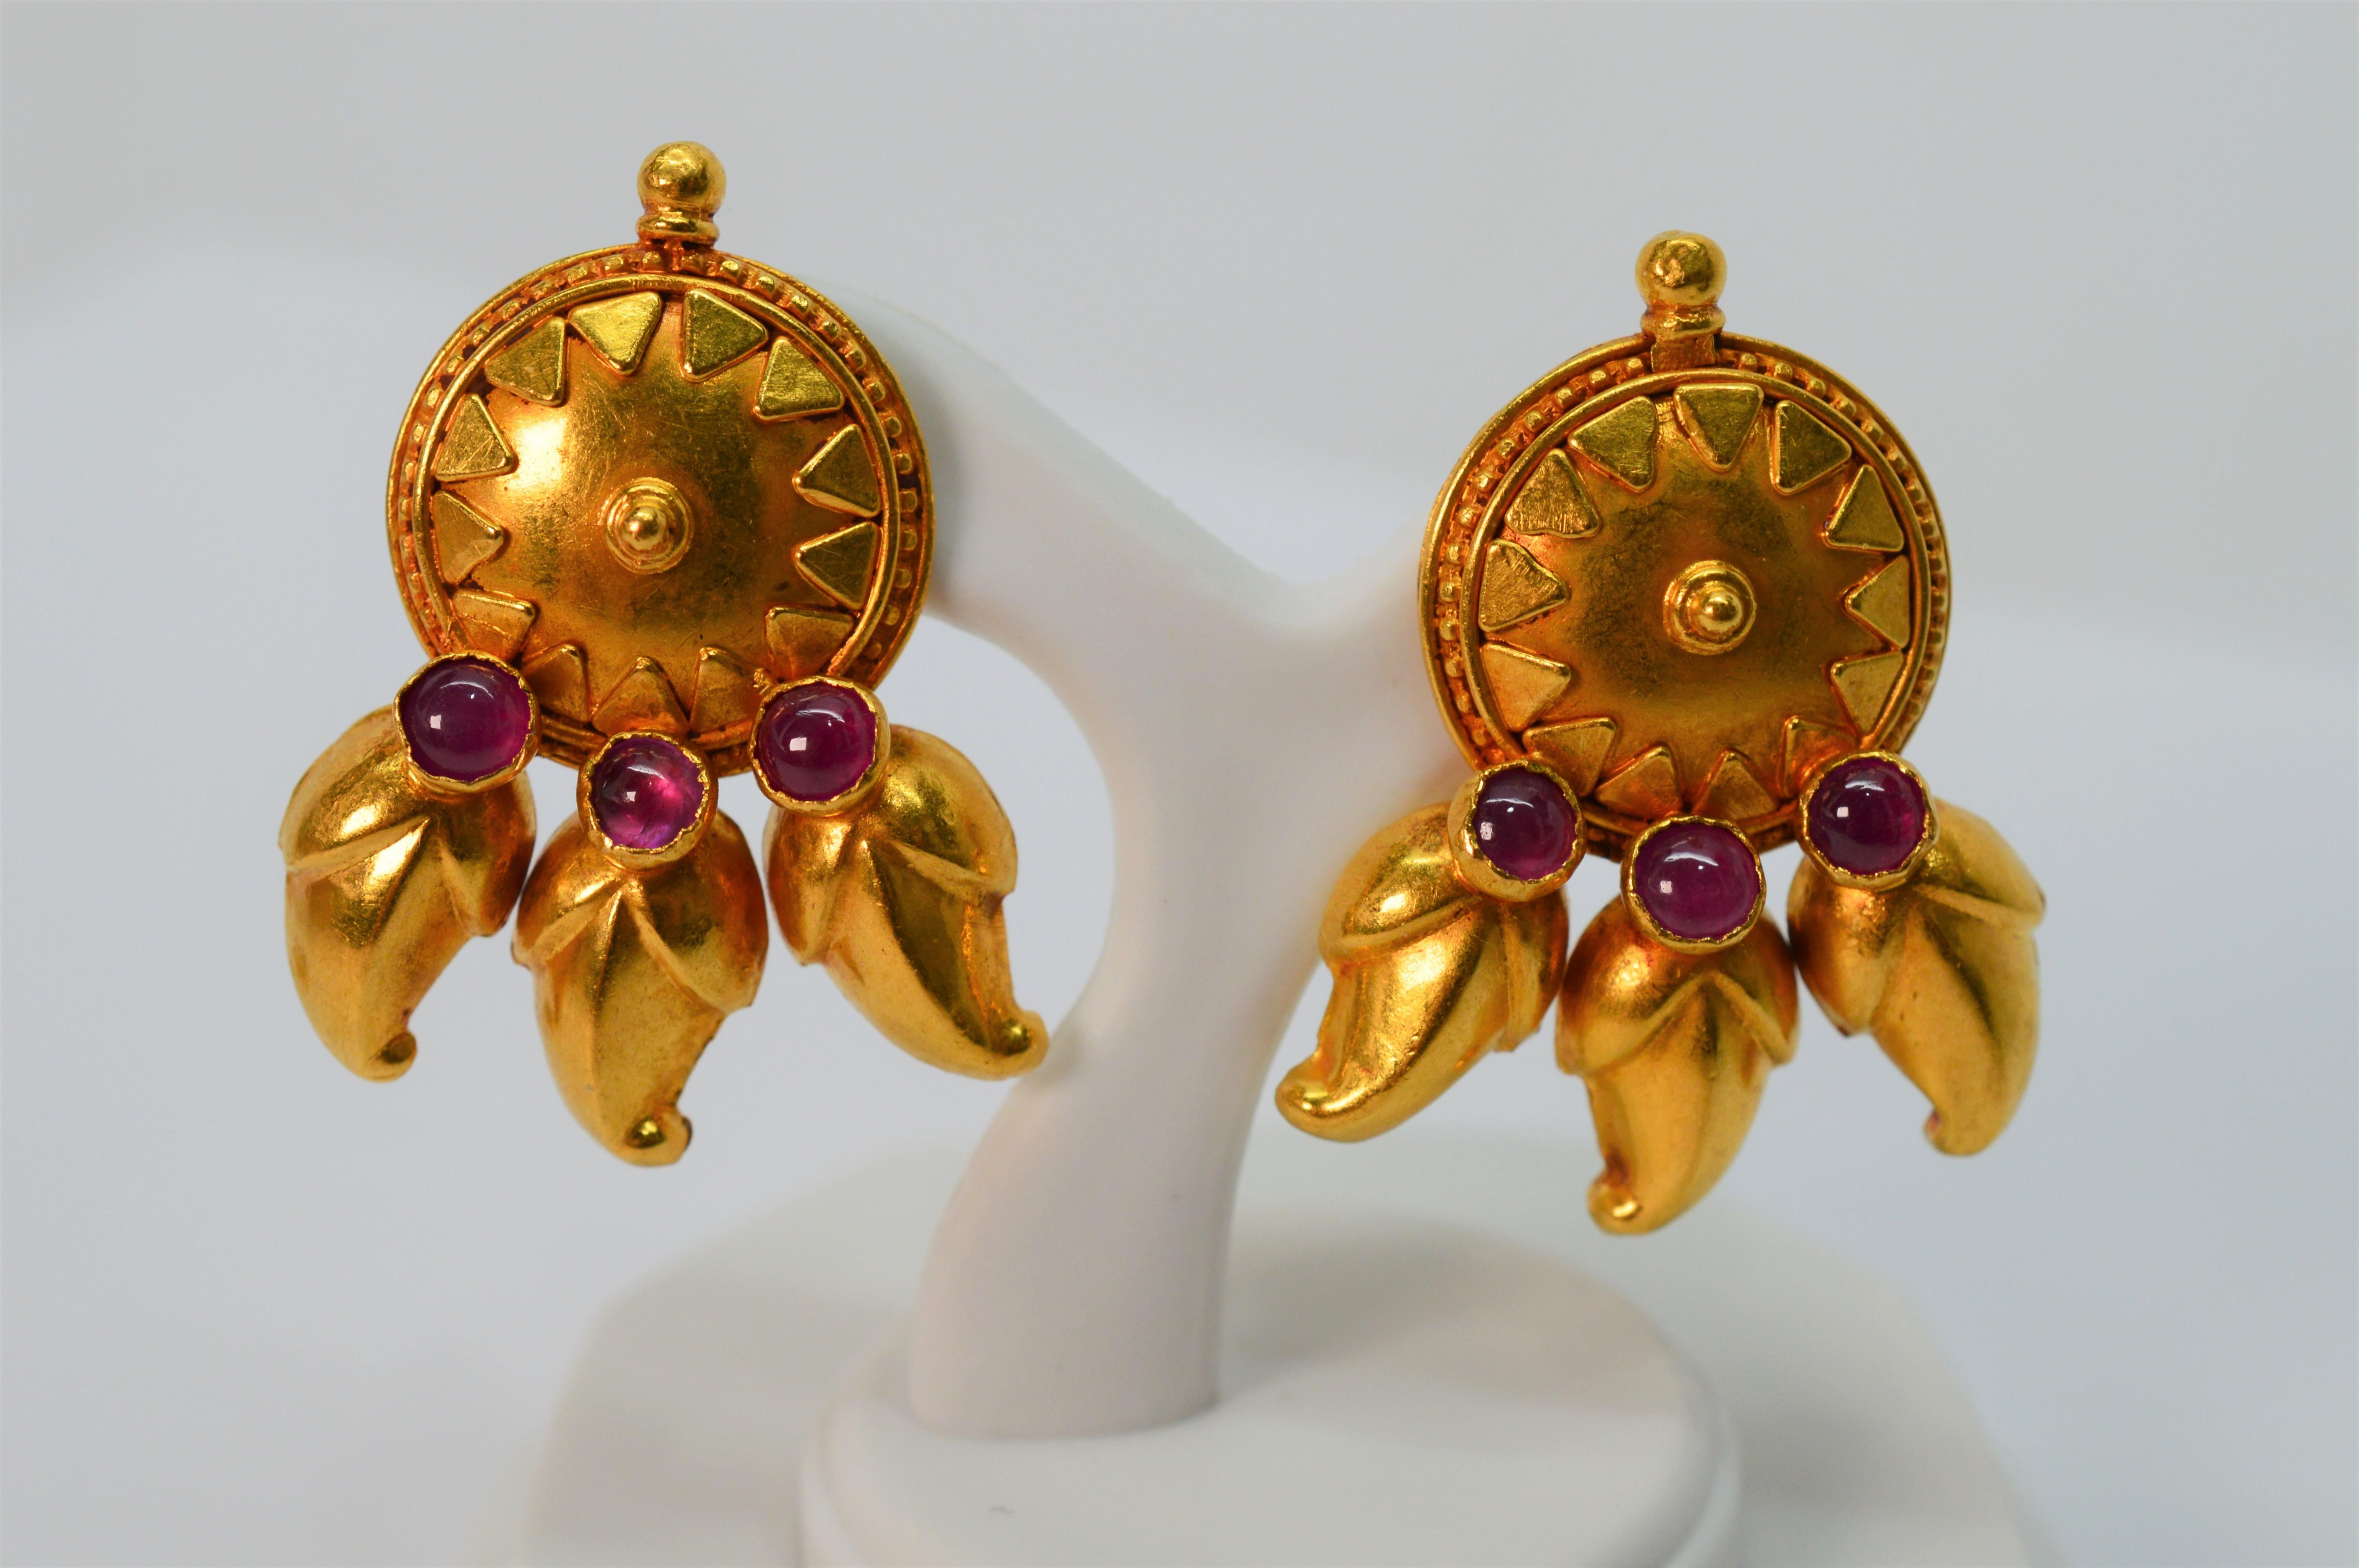 The soft satin finish highlights the Far East artisan features of these 22 Karat yellow gold medallion earrings. In a stud style, this regal pair measures 5/8 inch / approximately 16mm, and has a decorative gold medallion design that is accented